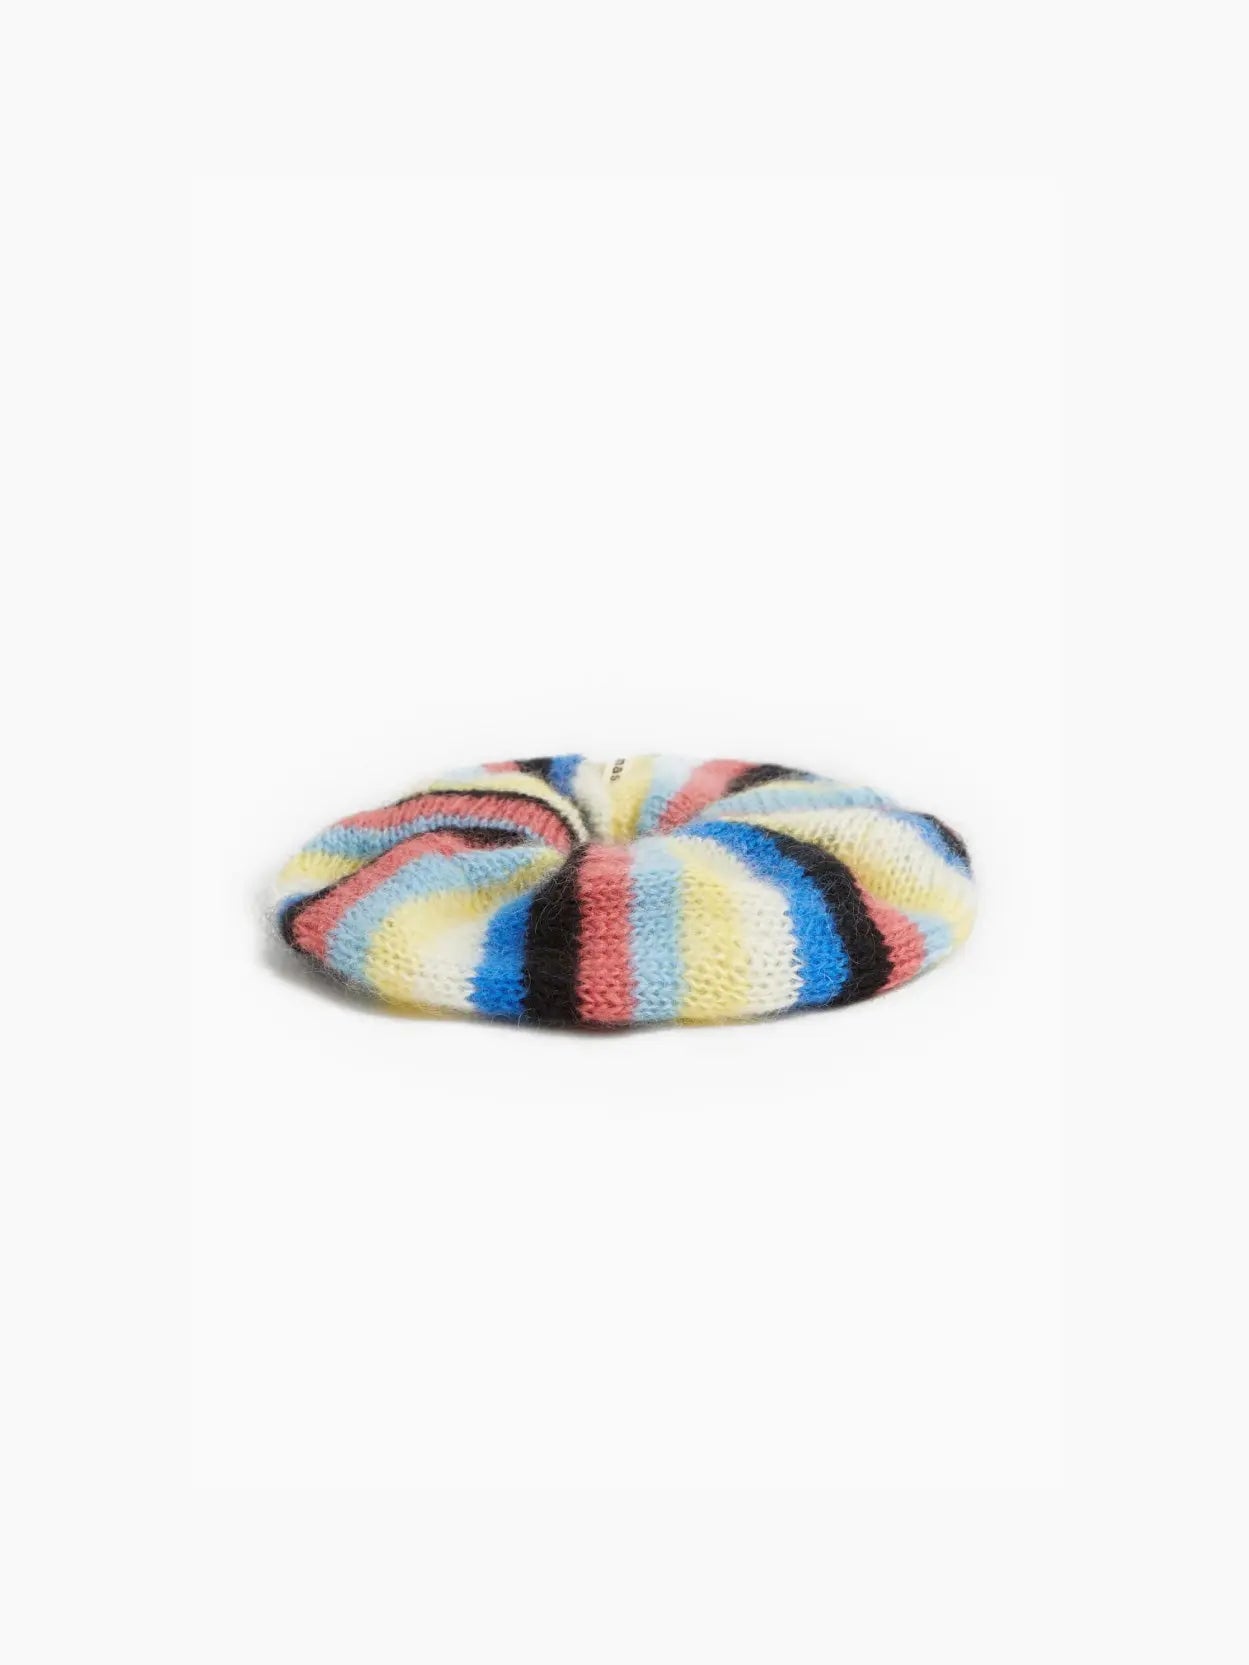 A colorful scrunchie with alternating stripes of blue, yellow, pink, black, and white, knitted from soft, fuzzy material, is displayed against a white background. The Elvira Mohair Scrunchie by Tomasa is available exclusively at Bassalstore.